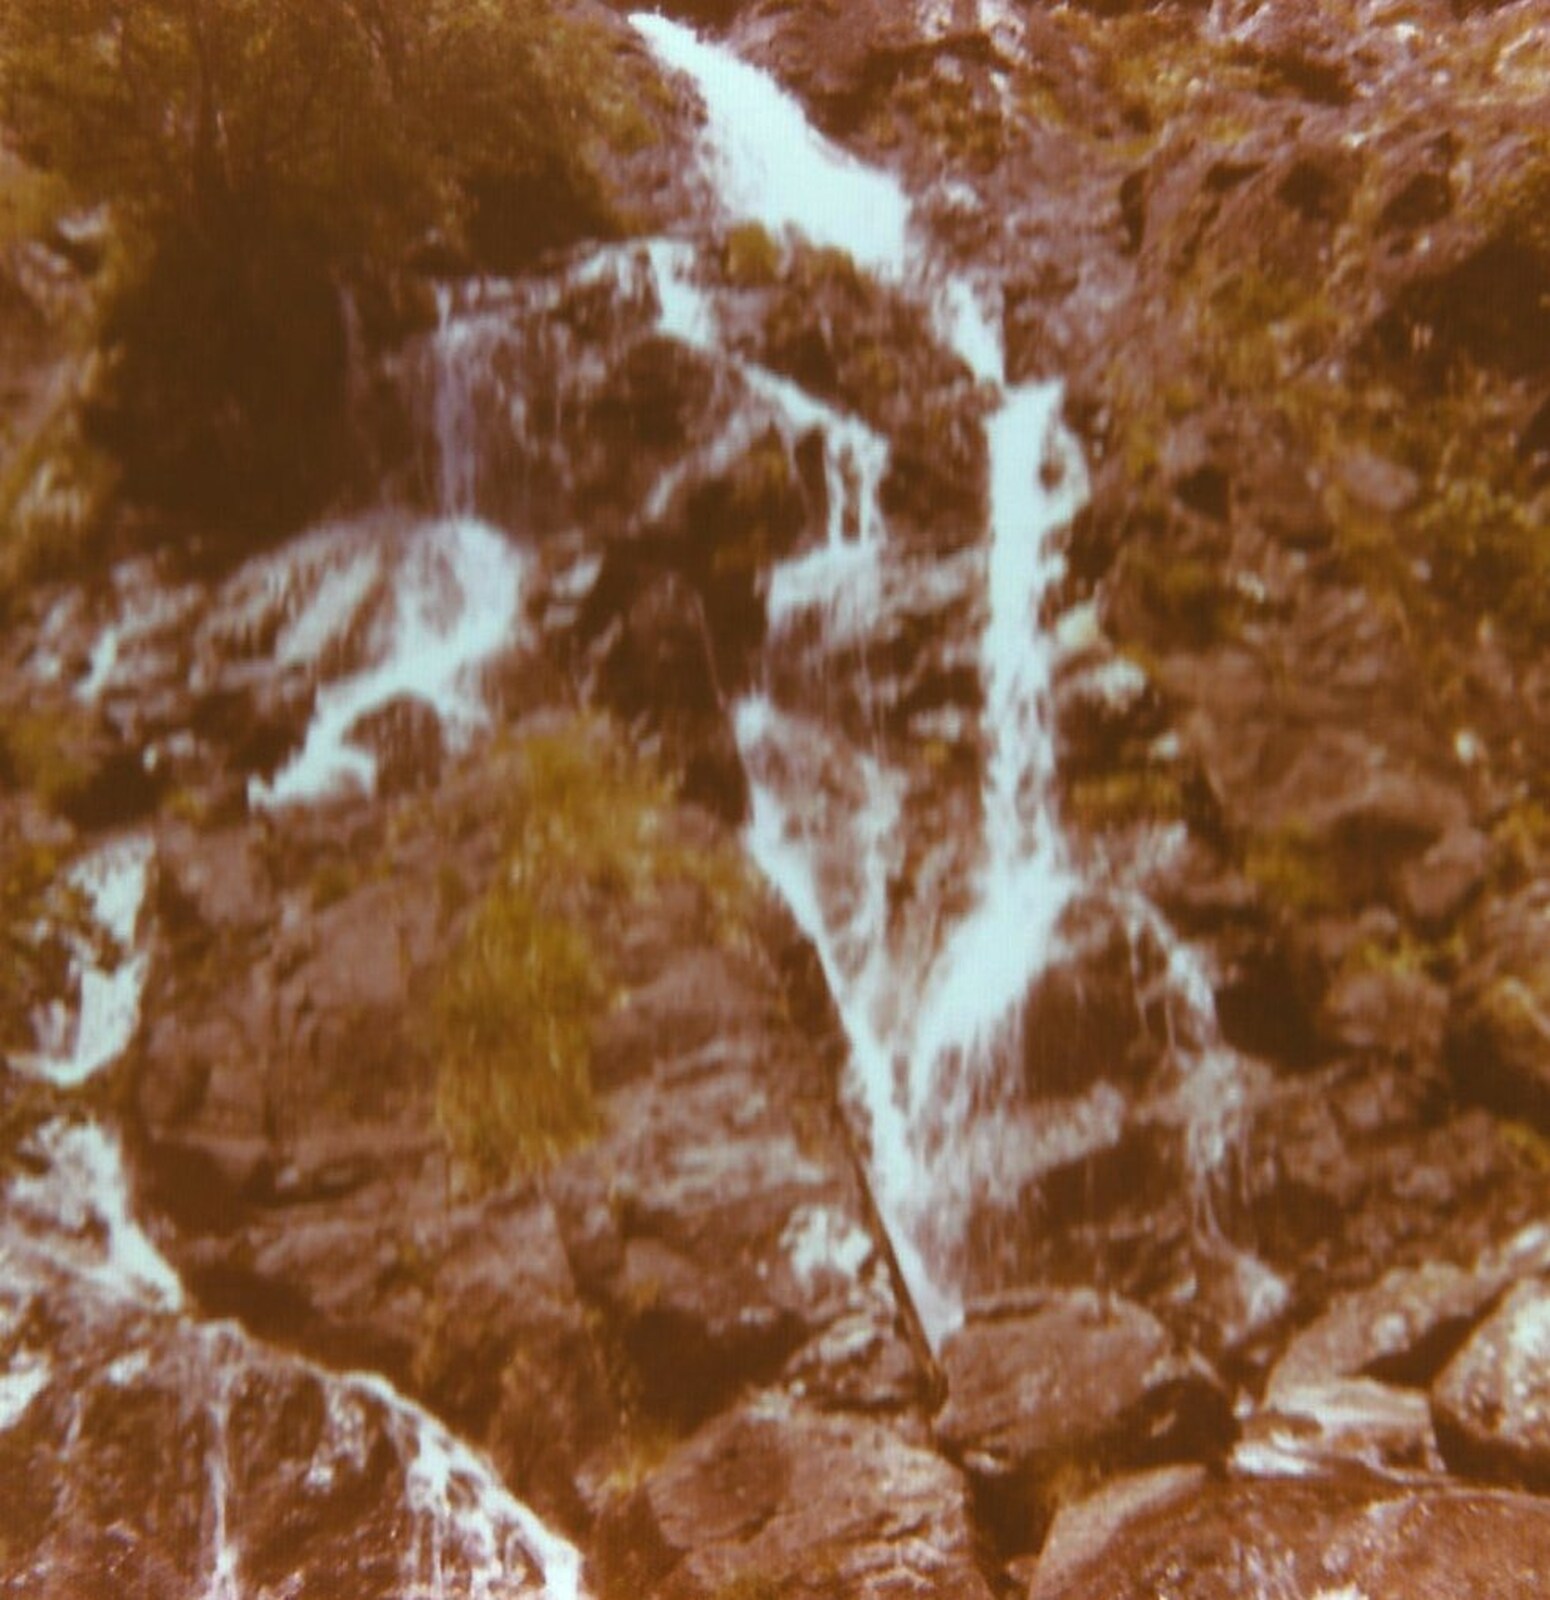 A waterfall from A Trip to Bram, Aude, France - 25th July 1980